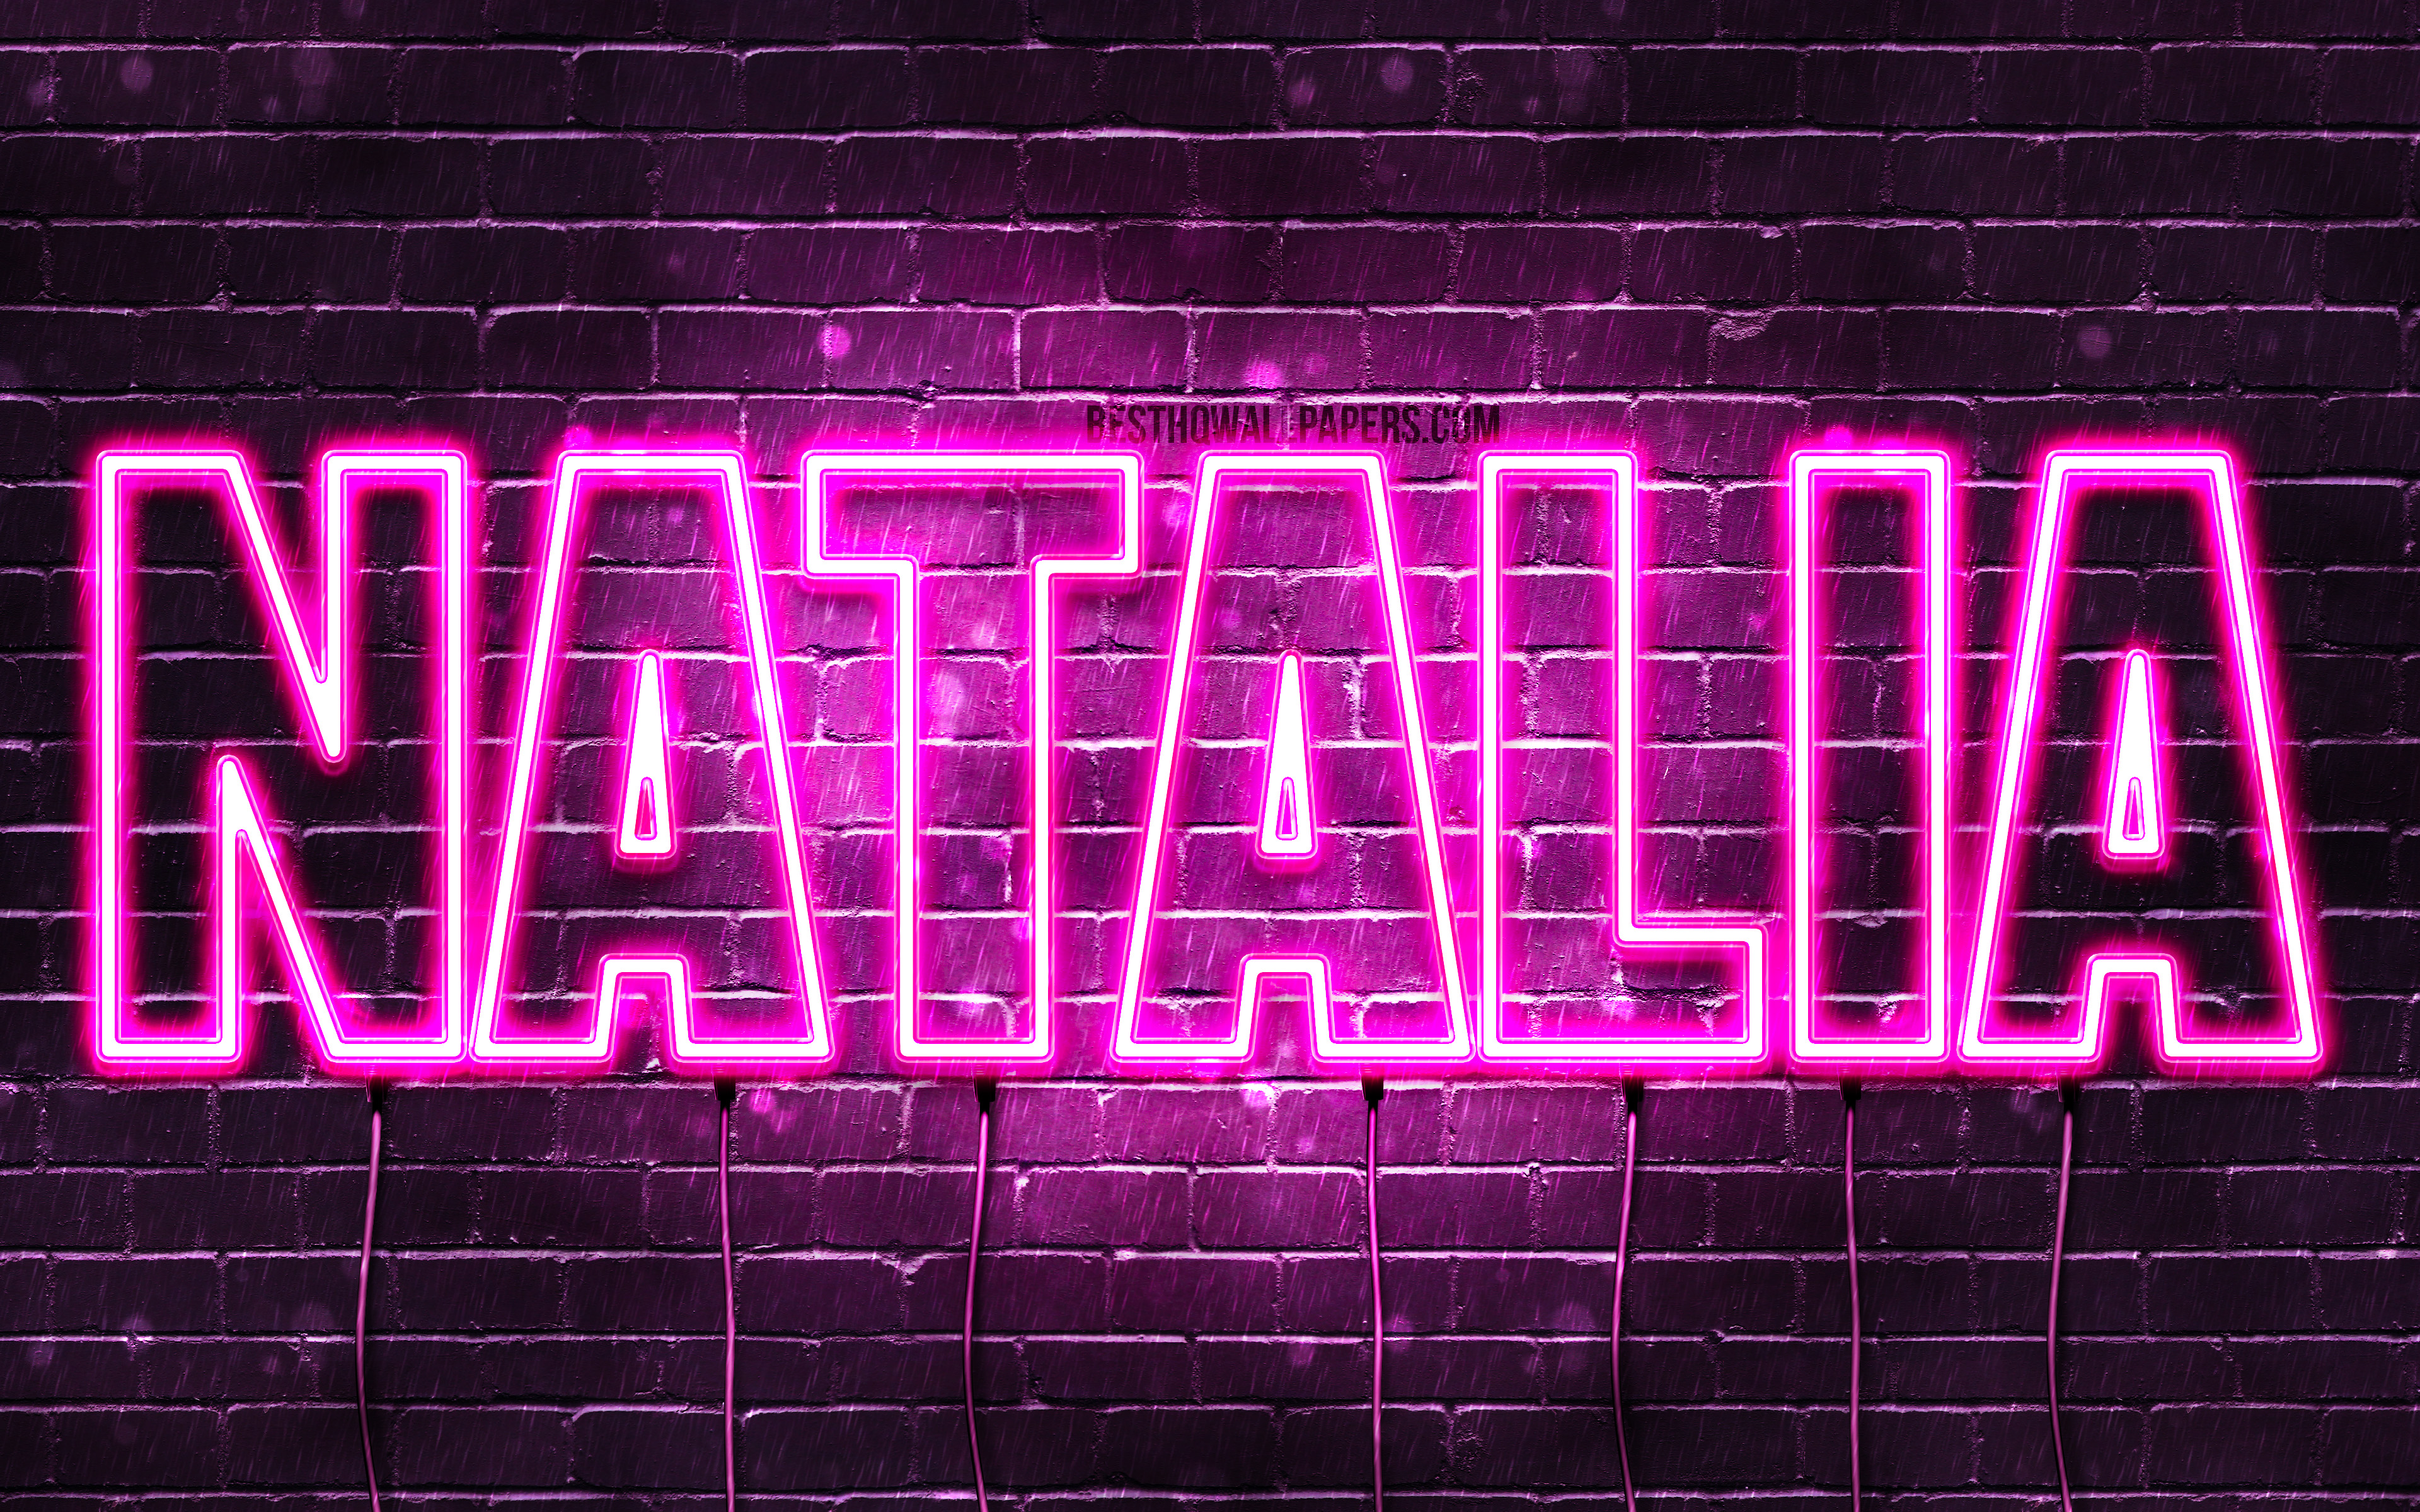 Download wallpapers Natalia, 4k, wallpapers with names, female names,  Natalia name, purple neon lights, horizontal text, picture with Natalia  name for desktop with resolution 3840x2400. High Quality HD pictures  wallpapers